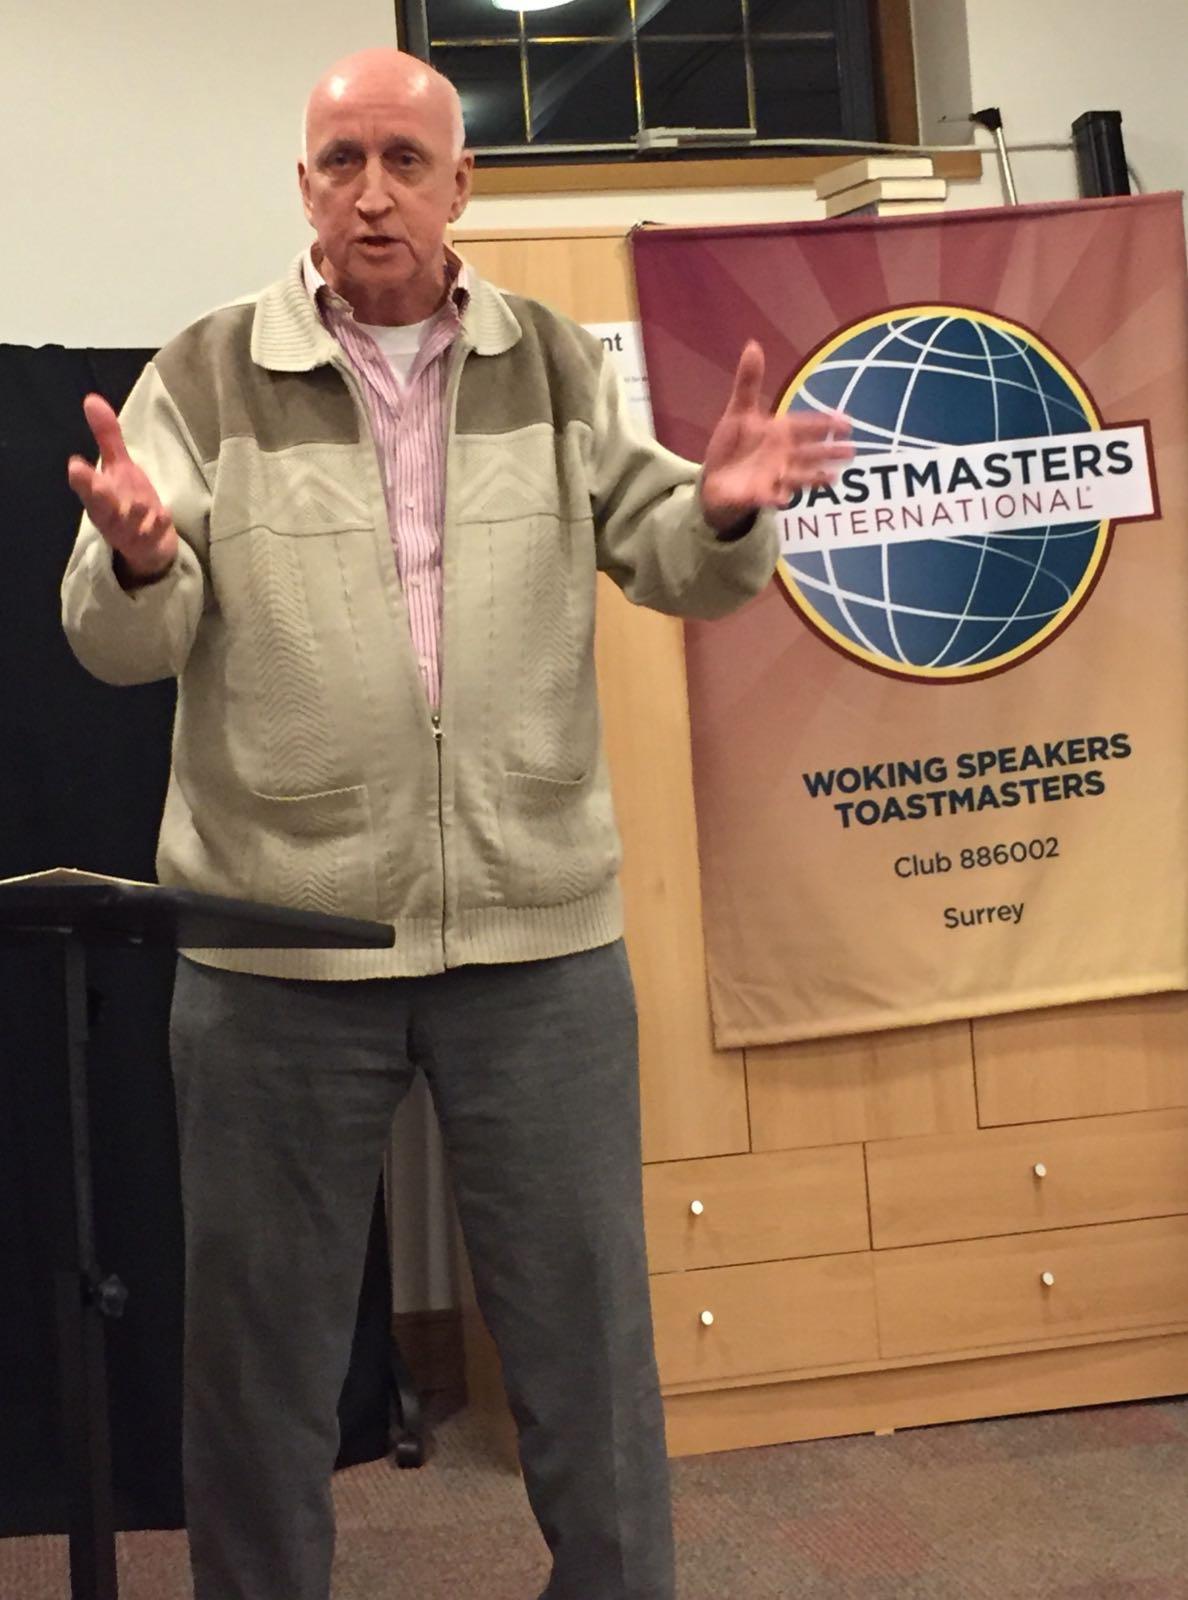 Our Gerry speaking at a Toastmasters group.